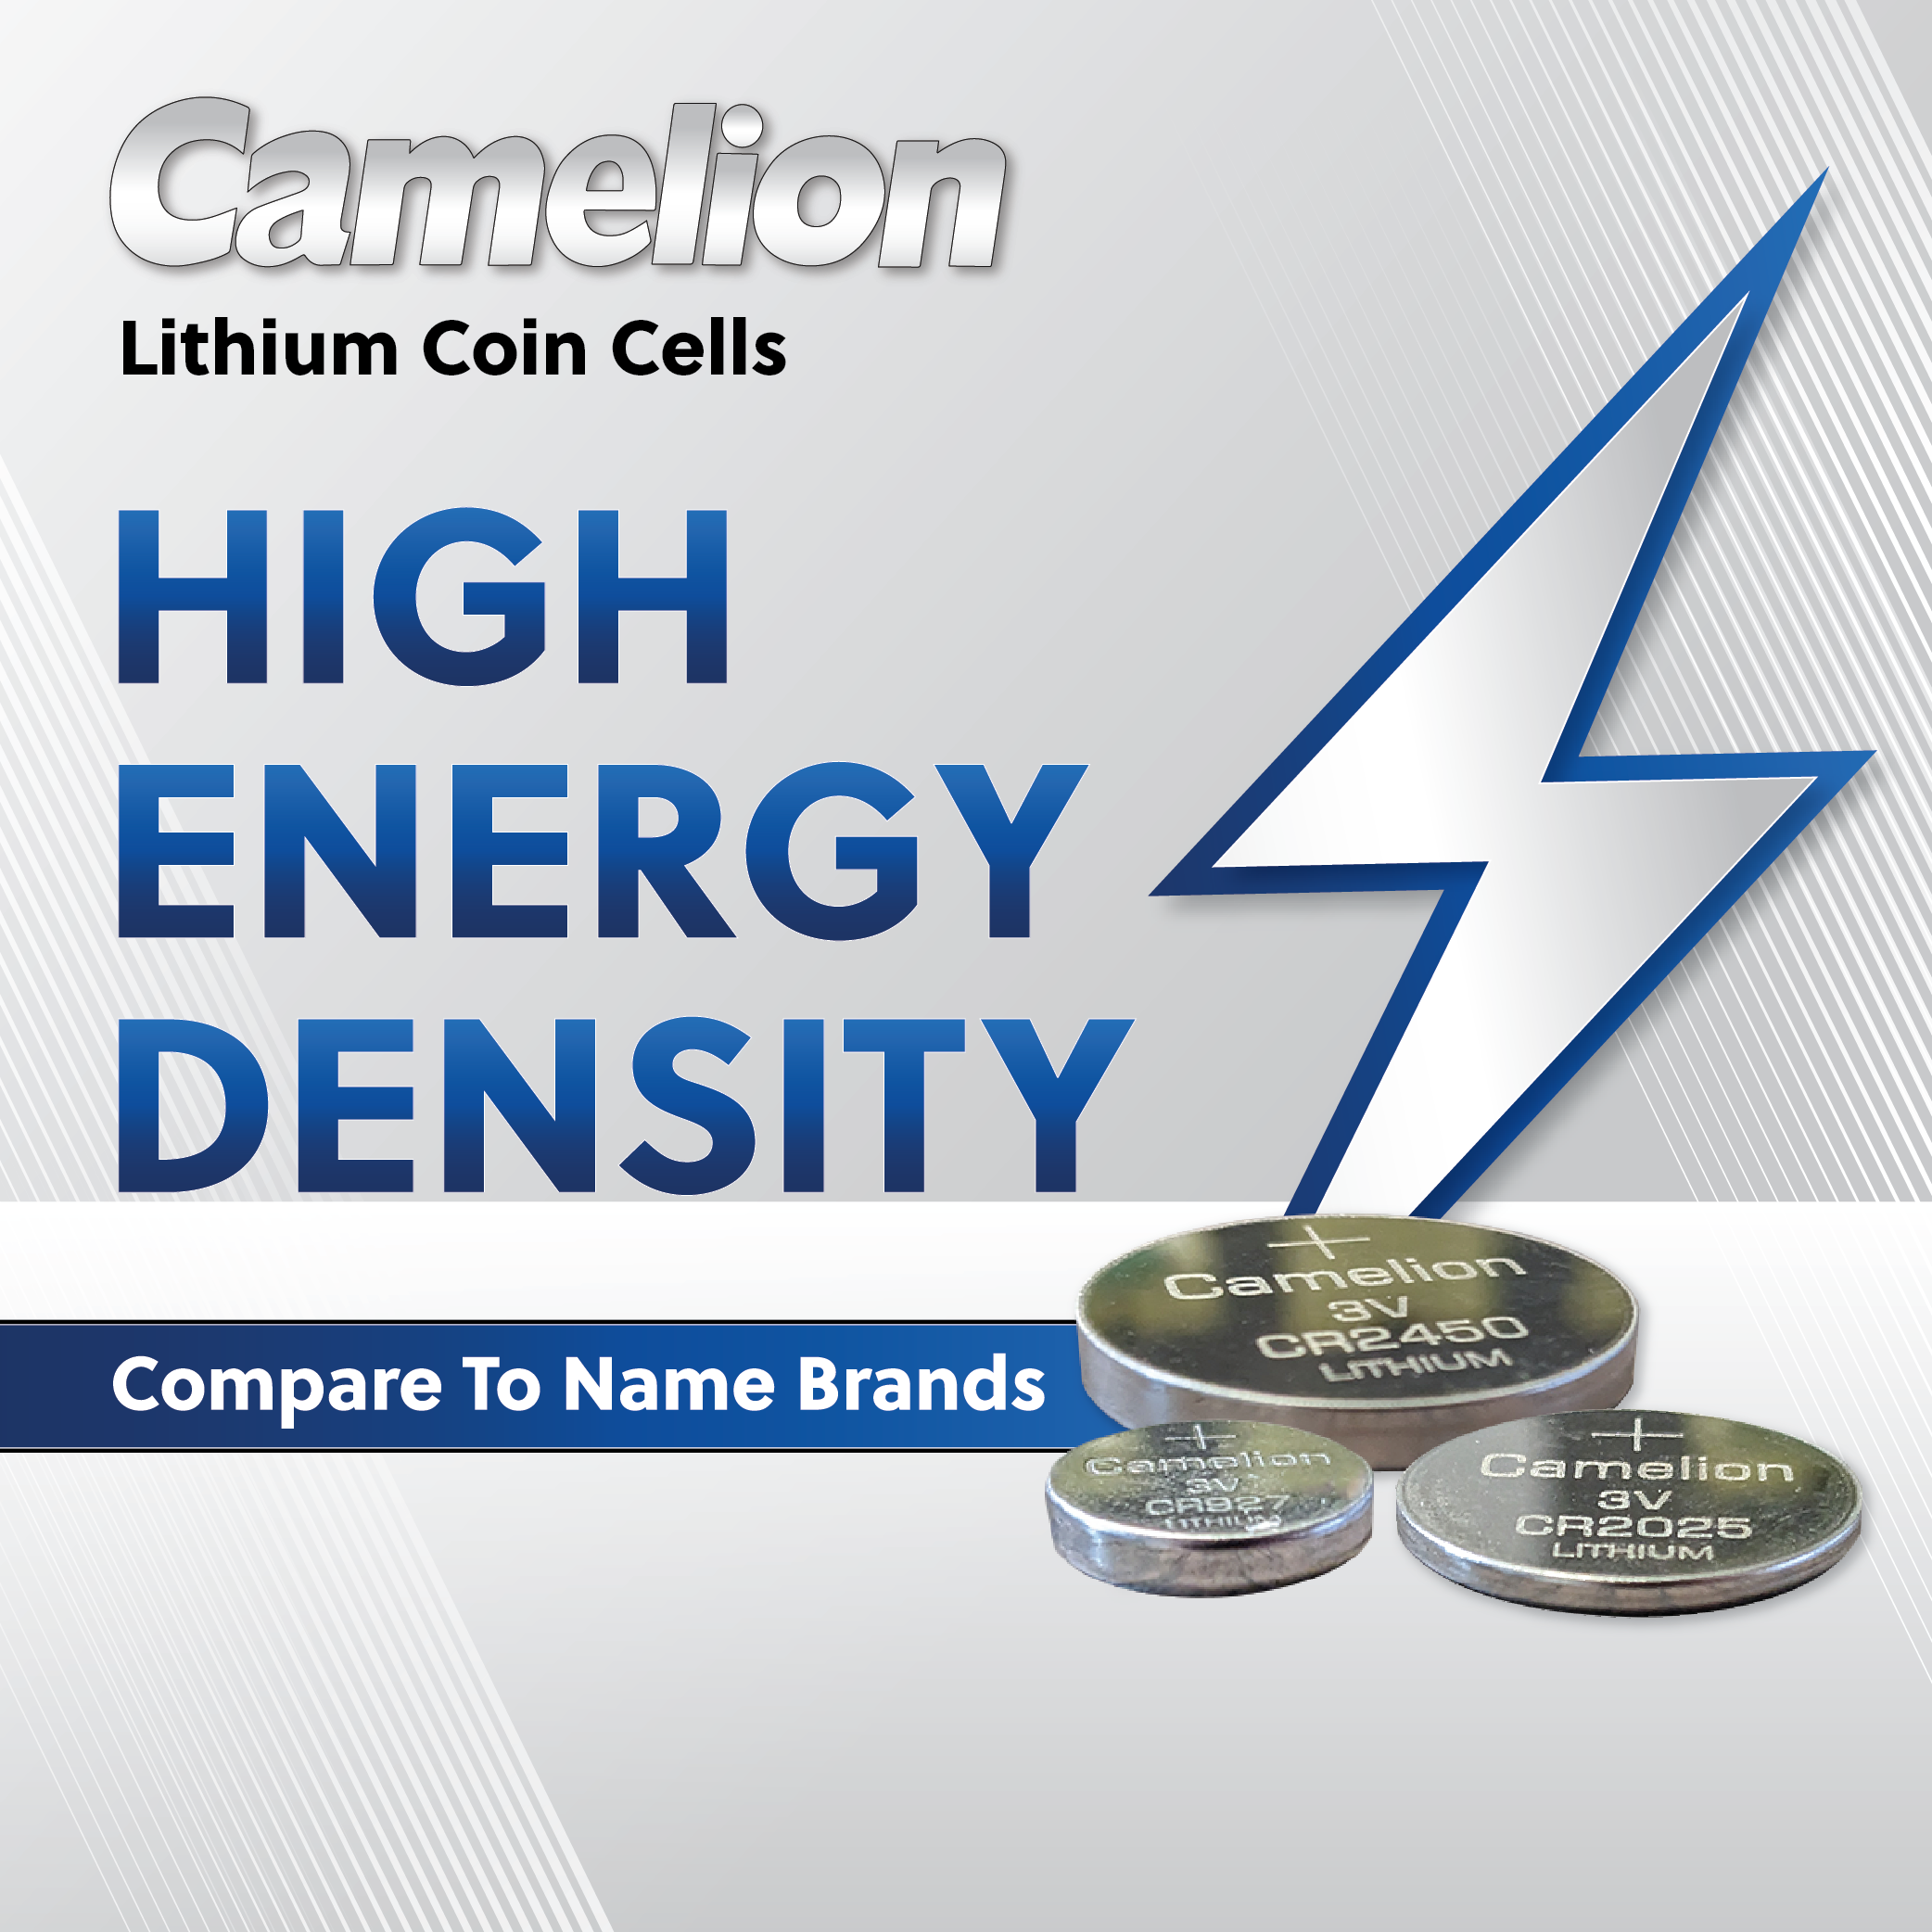 Camelion CR1220 3V Lithium Coin Cell Battery